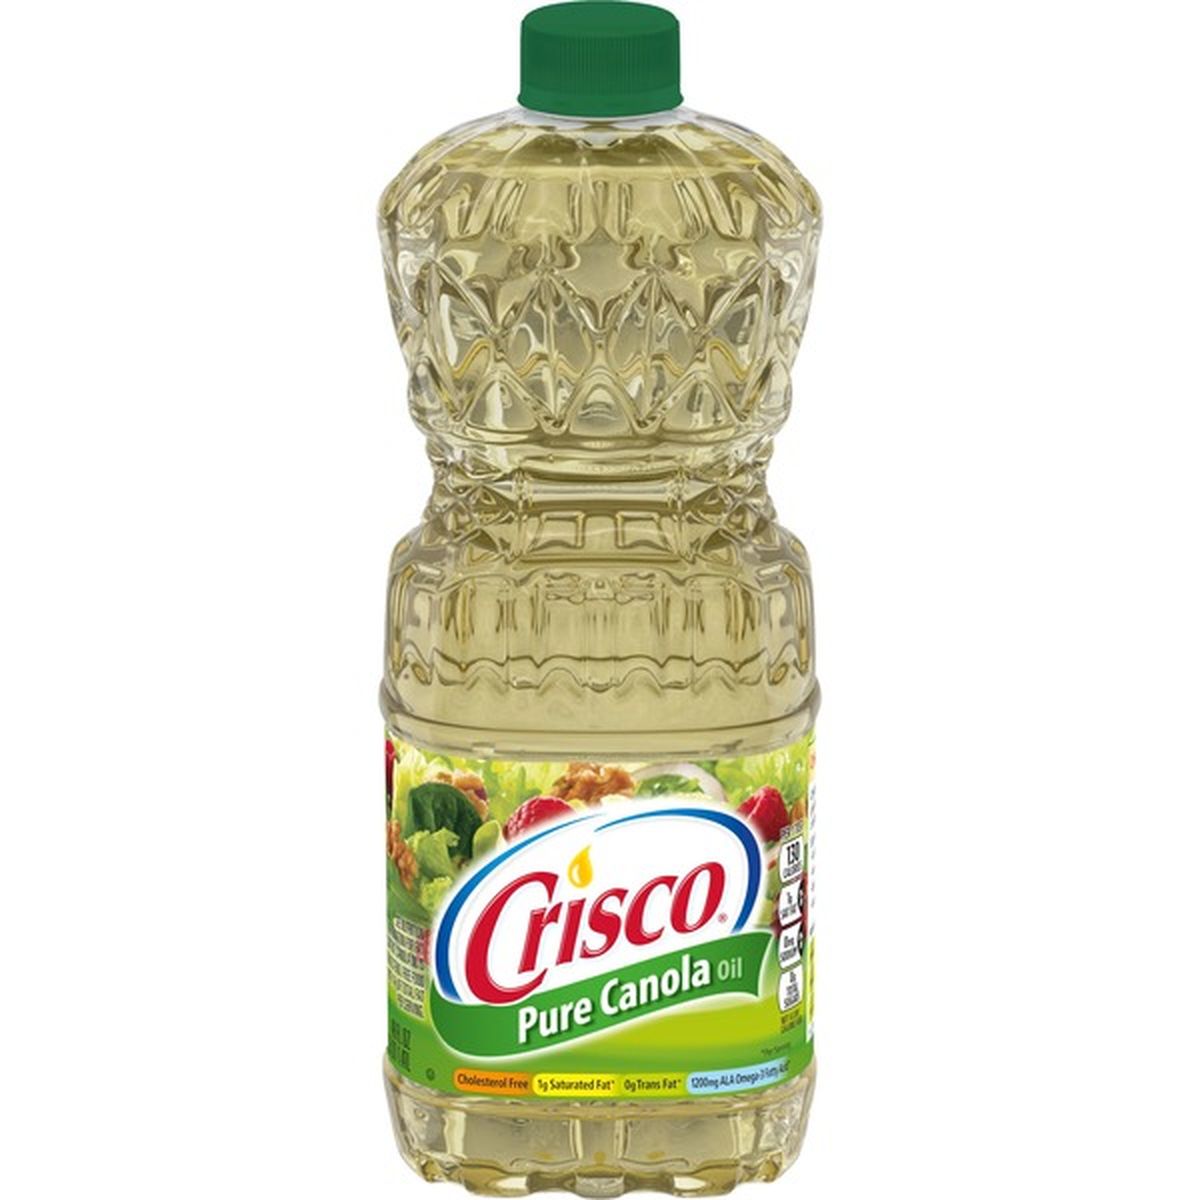 canola oil for frying at 350°F